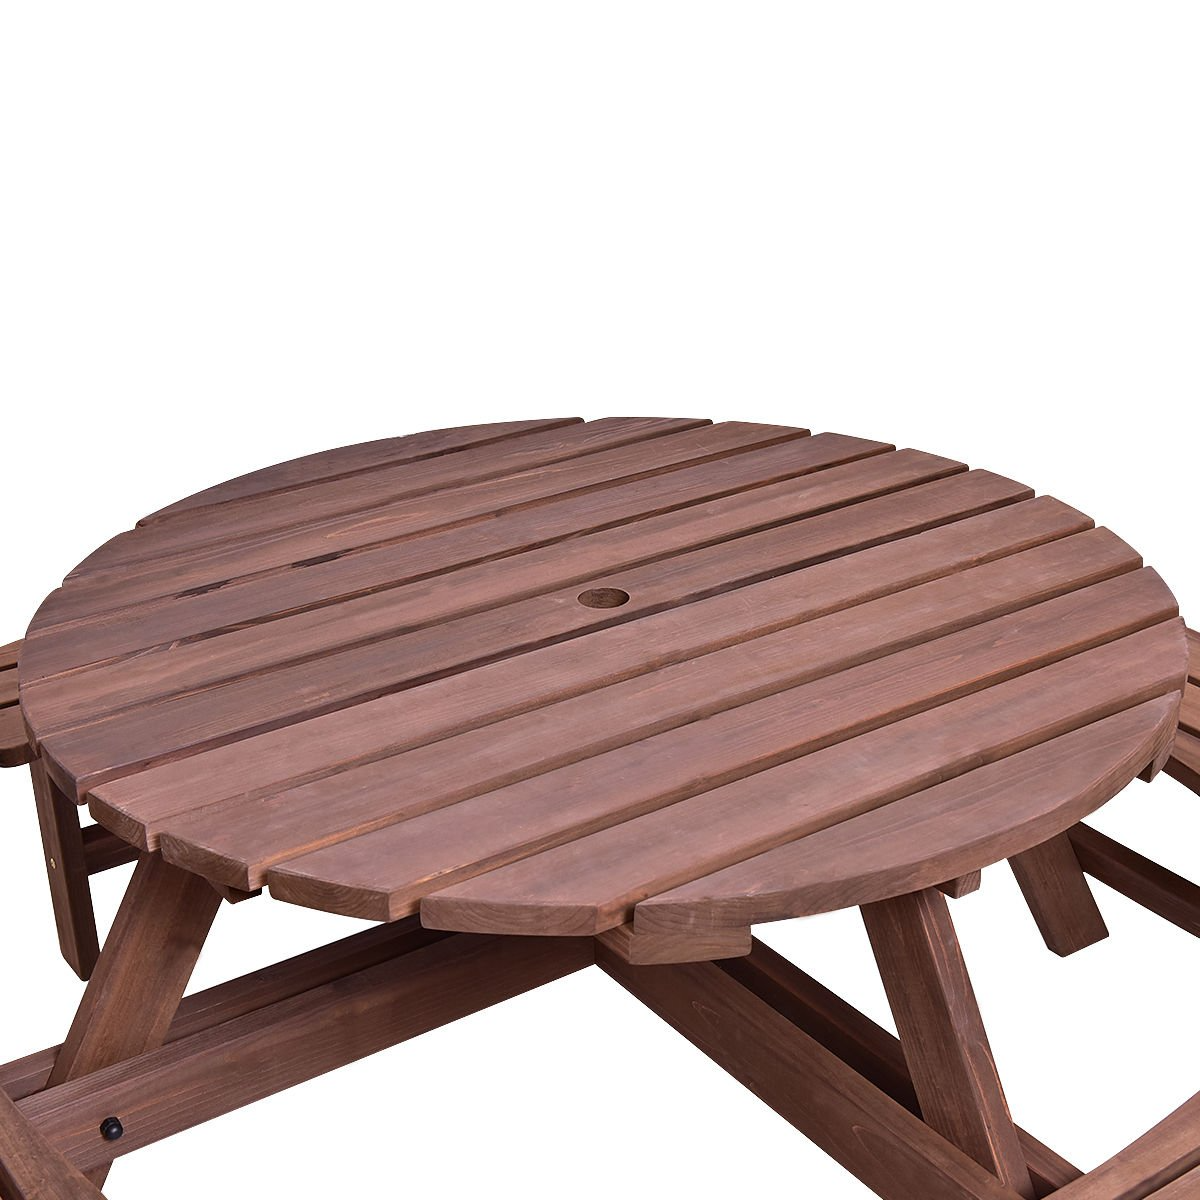 Giantex Wooden Picnic Table Set with Wood Bench, 4 Adults or 8 Kids Outdoor Round Table with Umbrella Hold Design